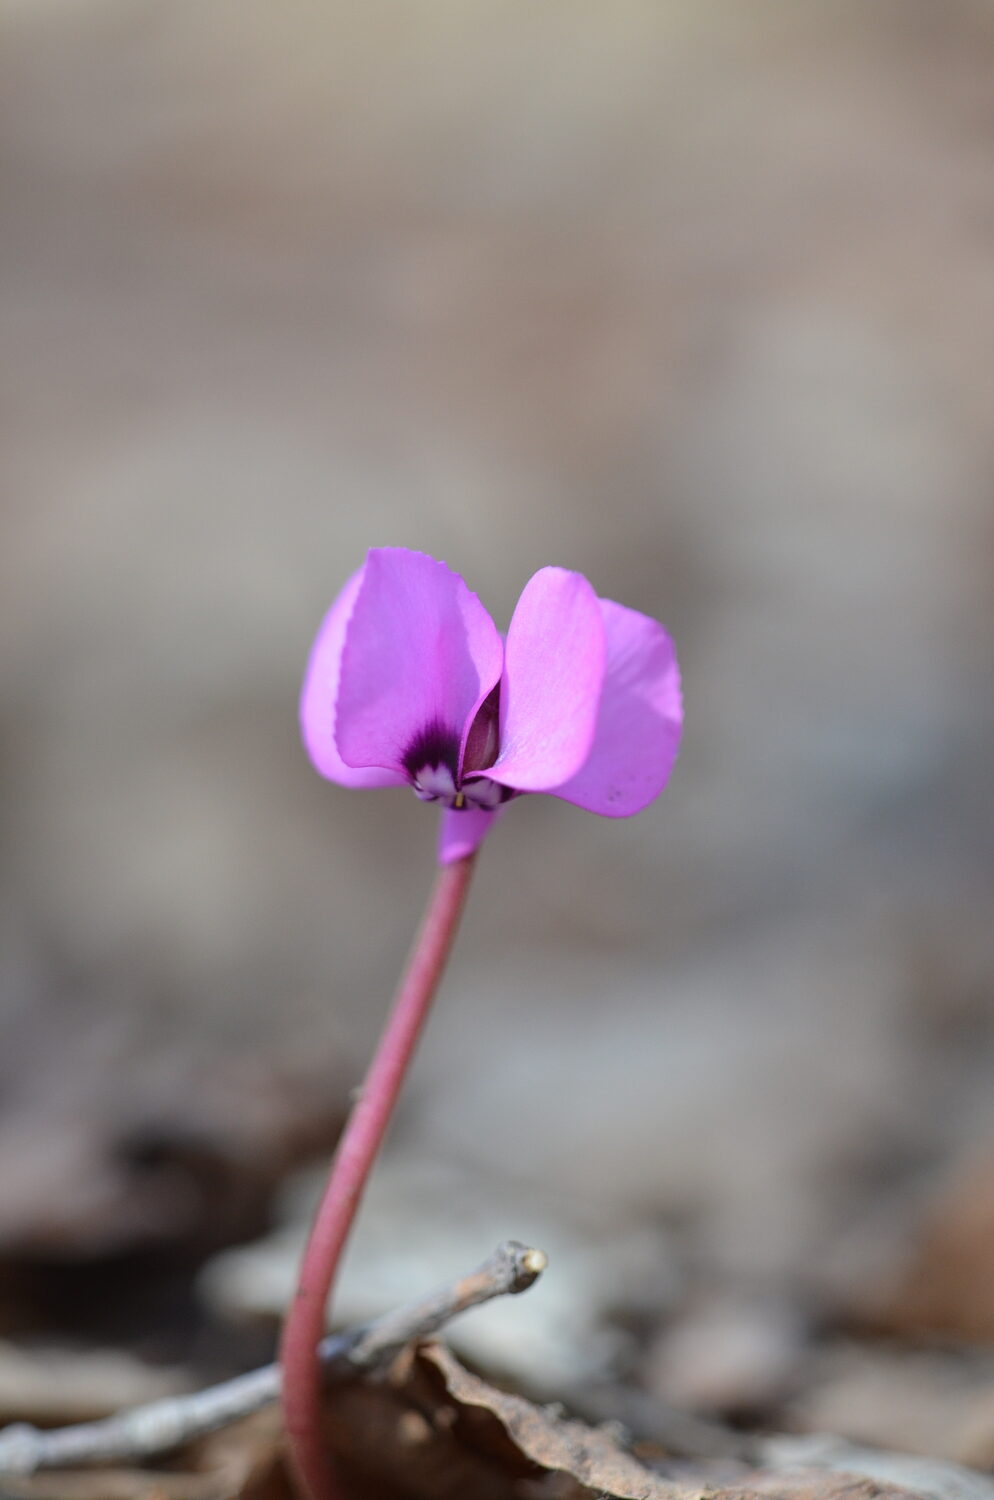 A Cyclamen coum flower atop its 2-inch stalk. This naturalizing bulb will flower much of the year and begins its show in the winter, even under the snow.  With no snow cover it’s a winter reminder that spring is not far away.
ANDREW MESSINGER